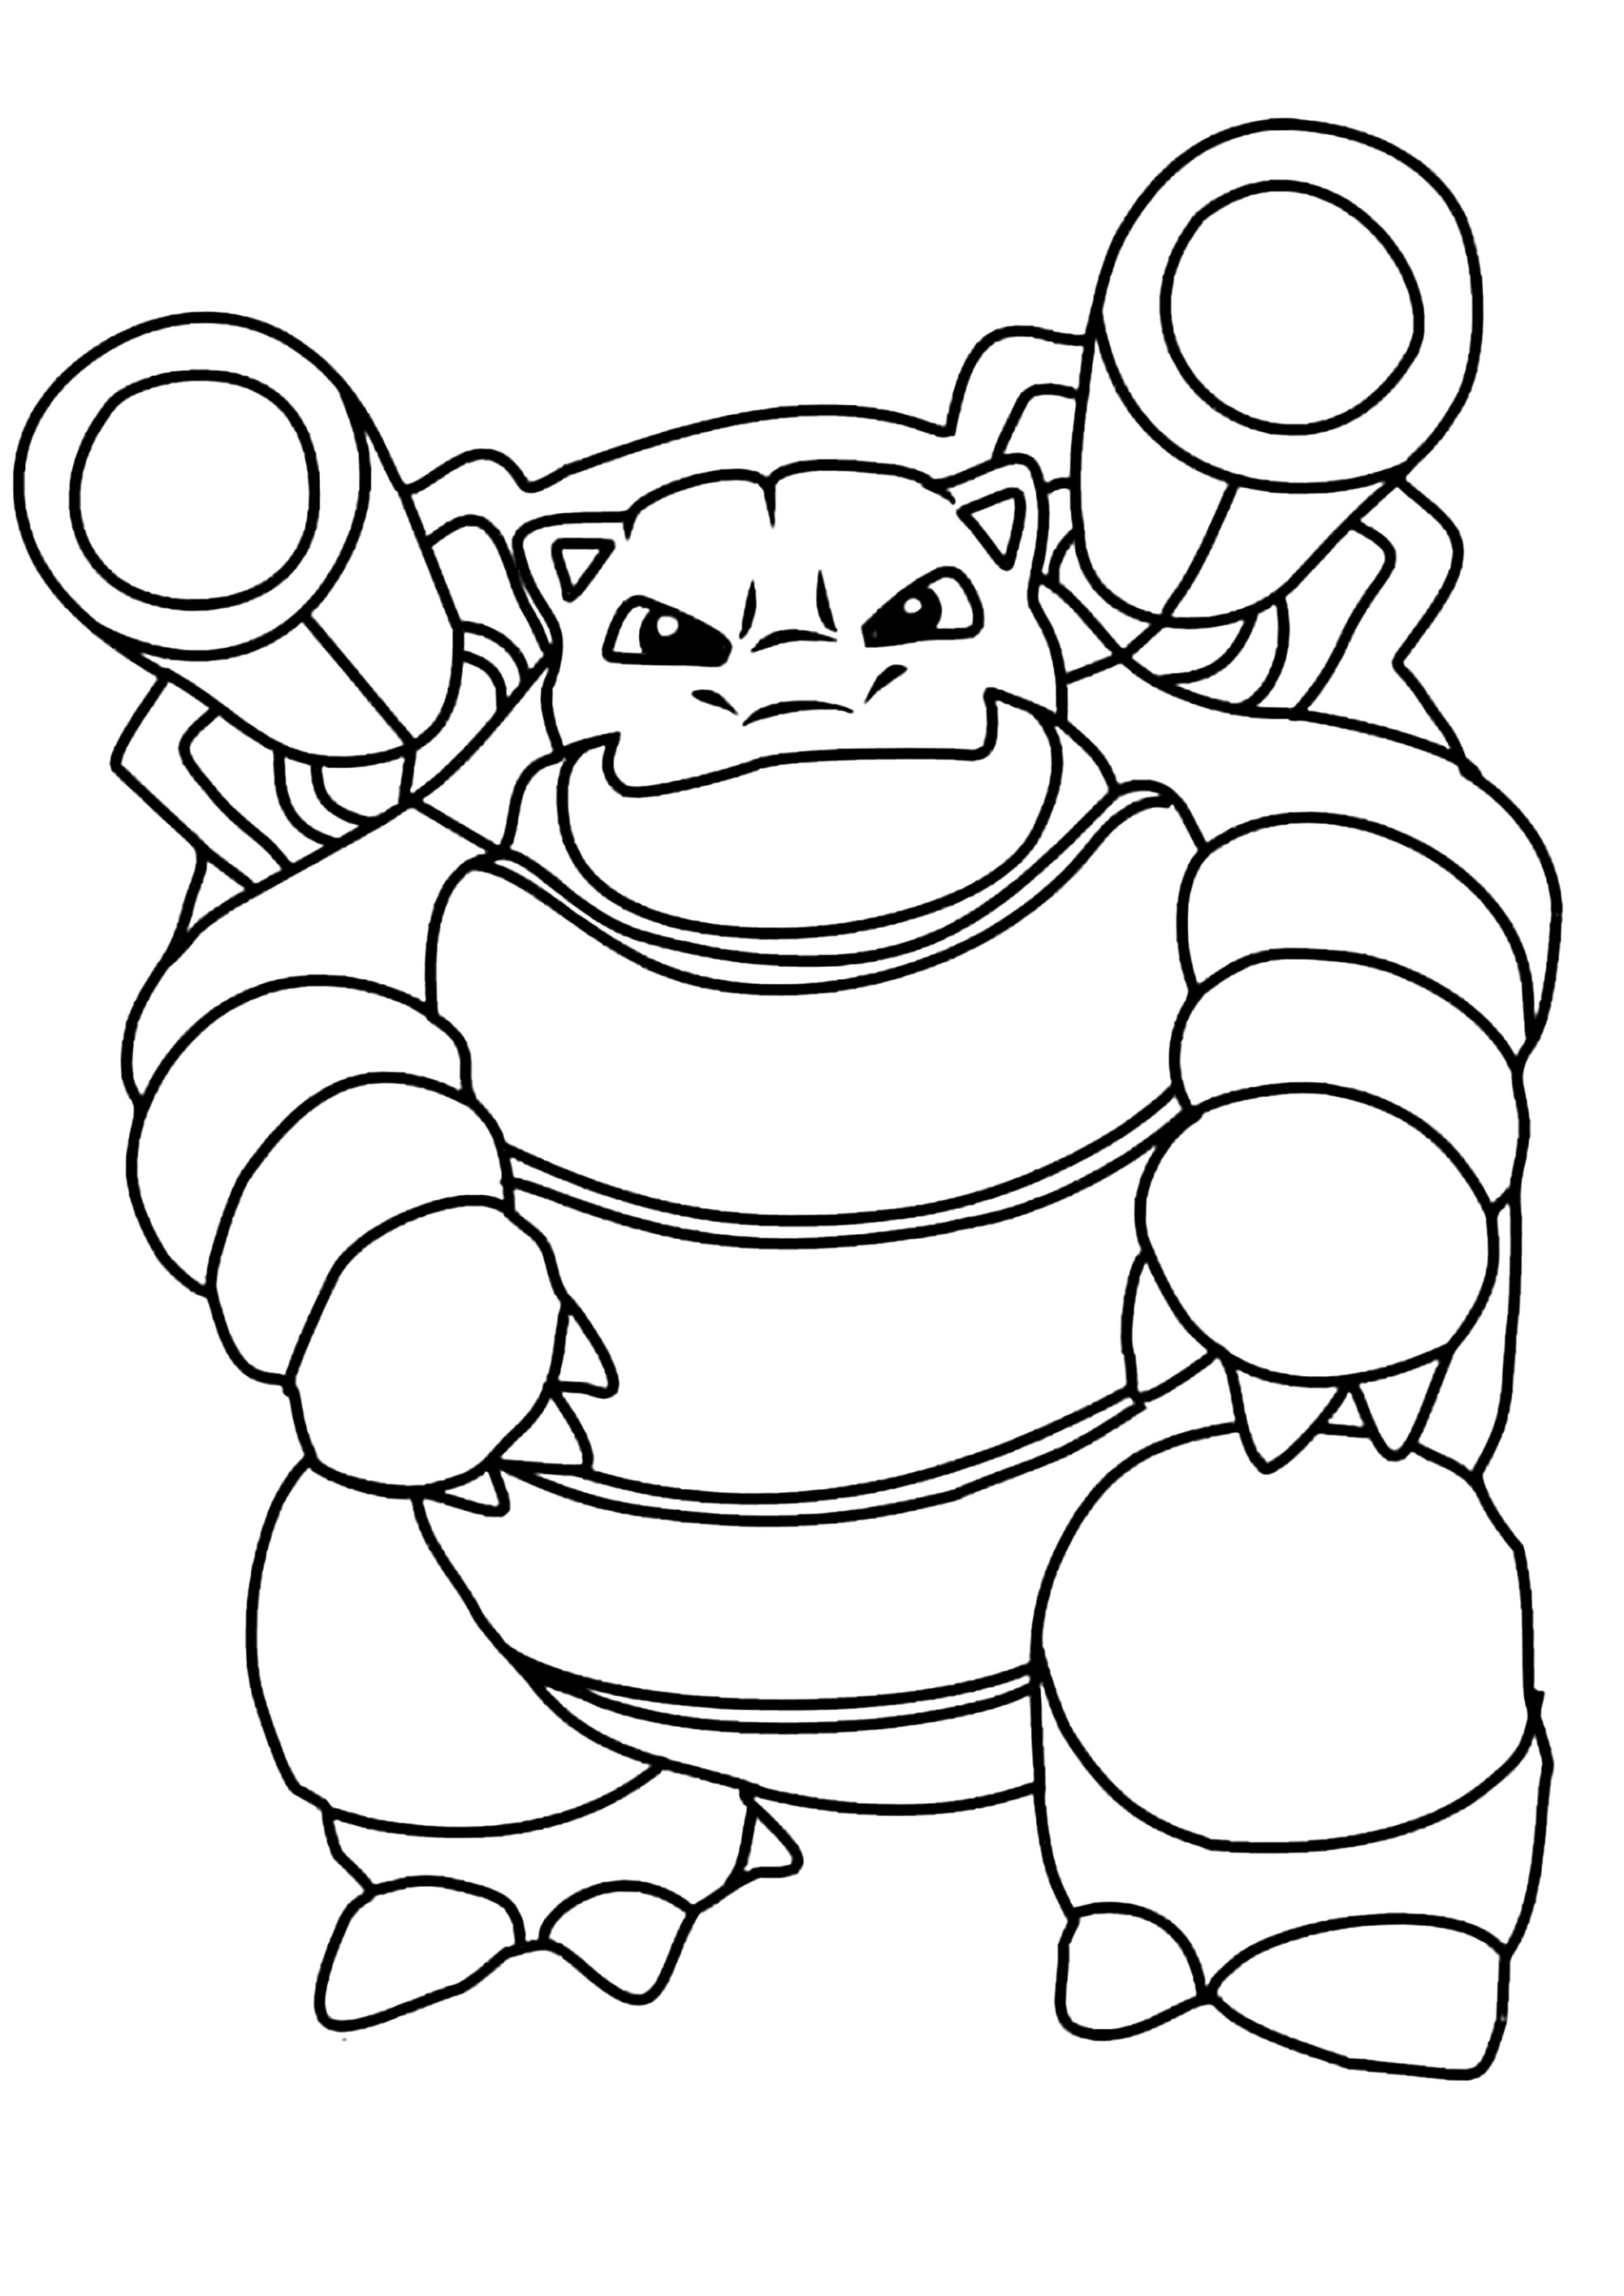 Blastoise : Easy Coloring page